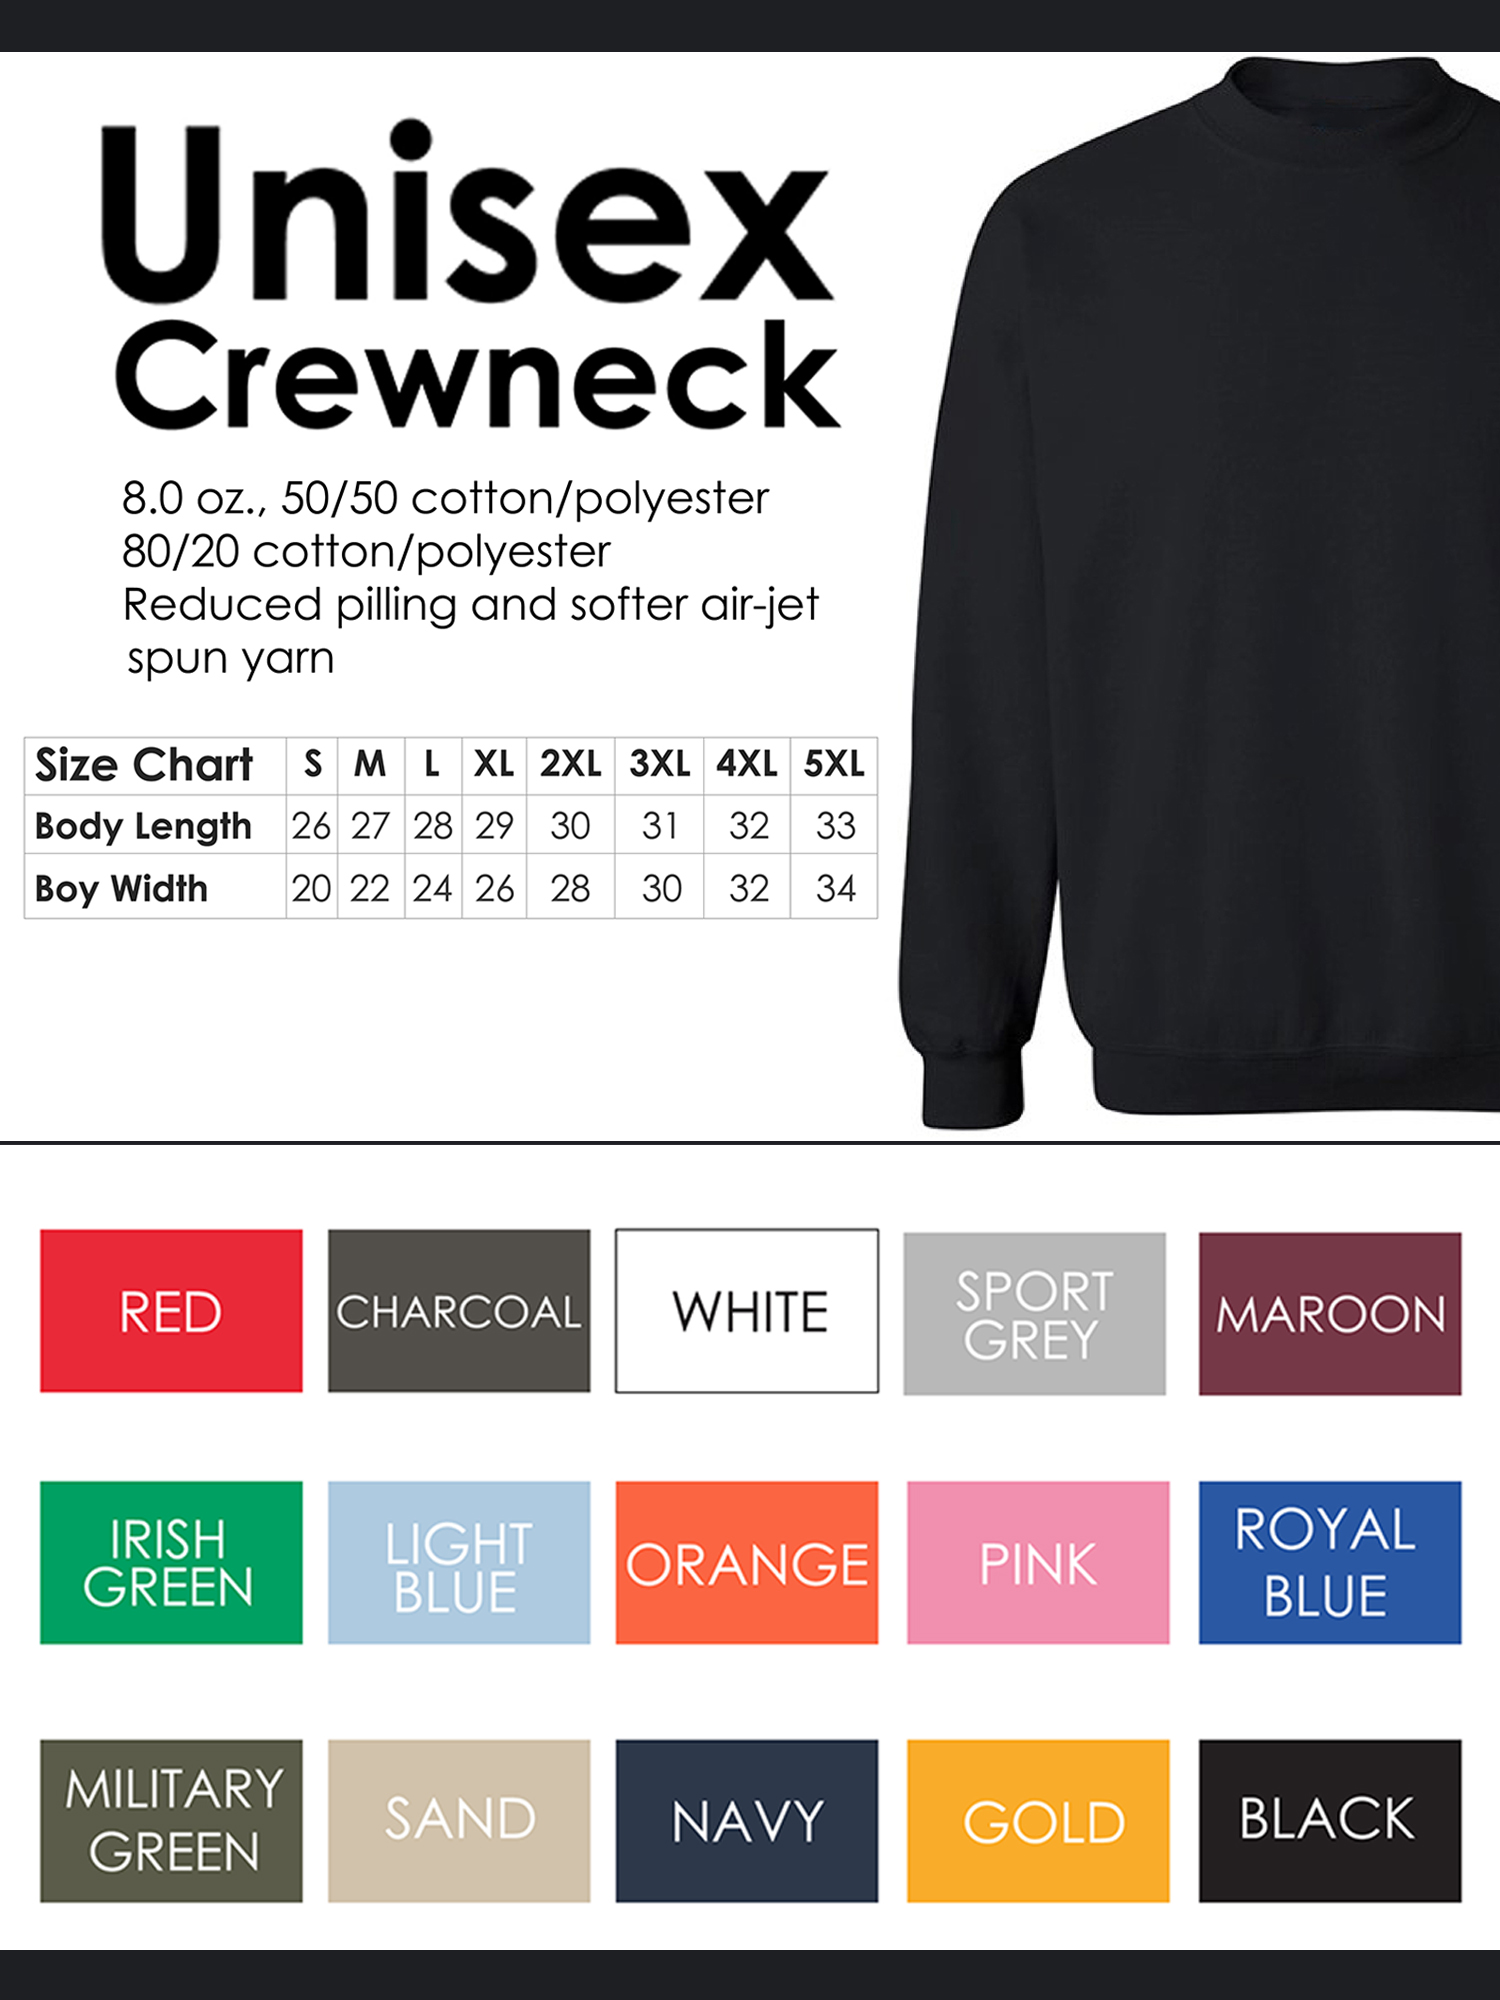 Awkward Styles Crewneck for Fisher Future Fisher Unisex Crewneck Fisher Sweater for Men Future Fisher Crewneck for Women Fishing Clothes Future Fisher Crewneck Fishers Gifts Sweater for Fisher - image 5 of 5